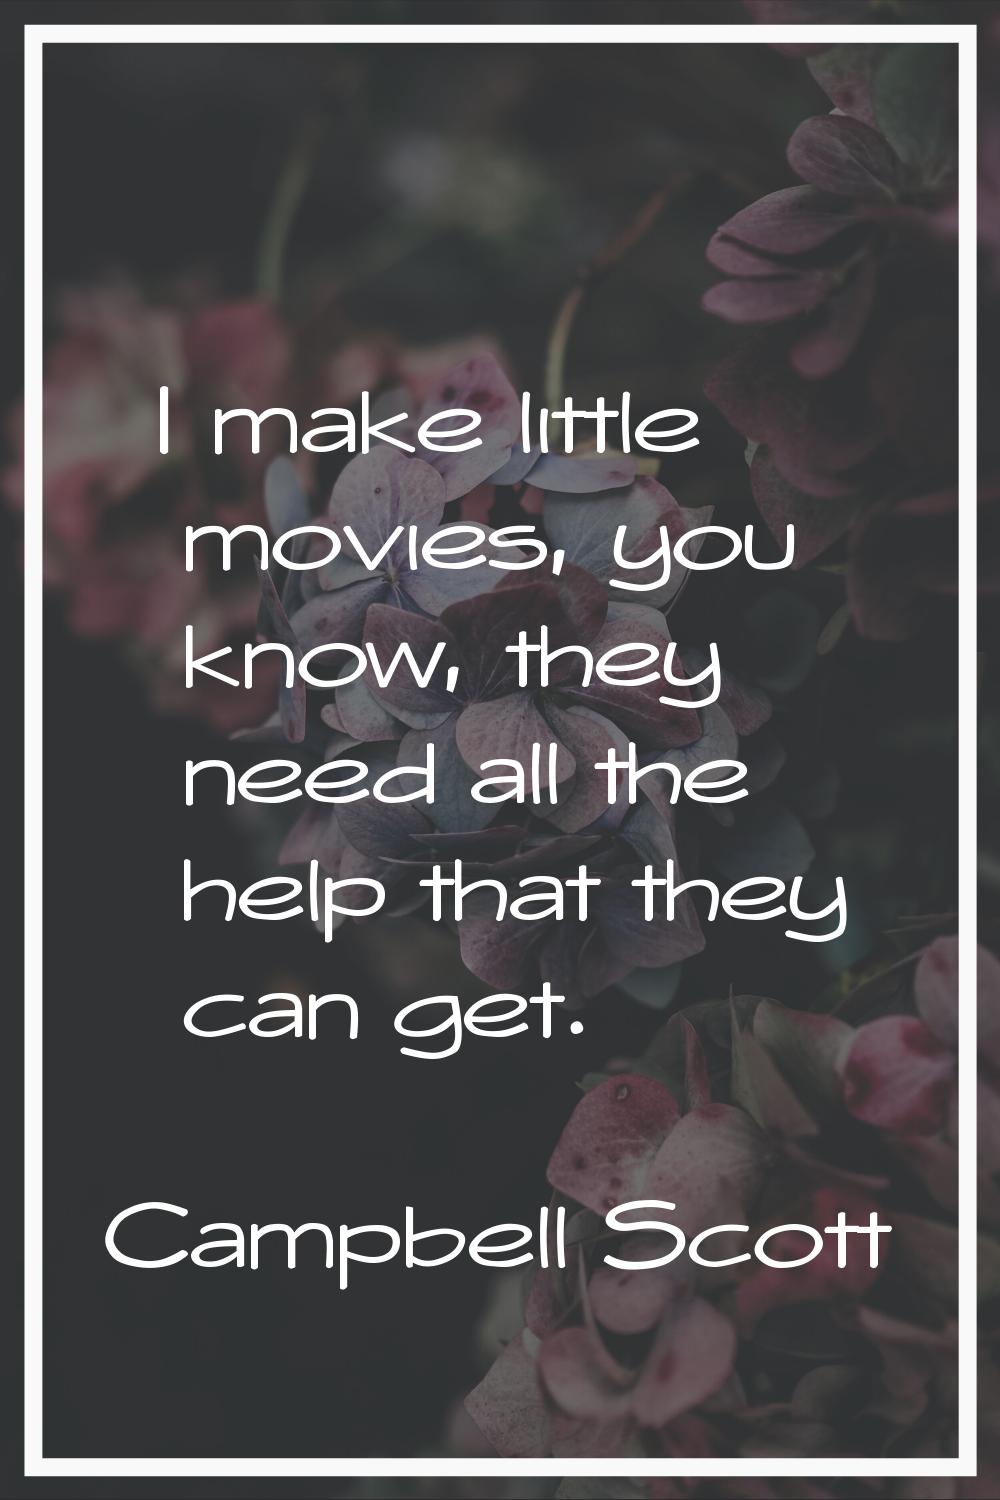 I make little movies, you know, they need all the help that they can get.